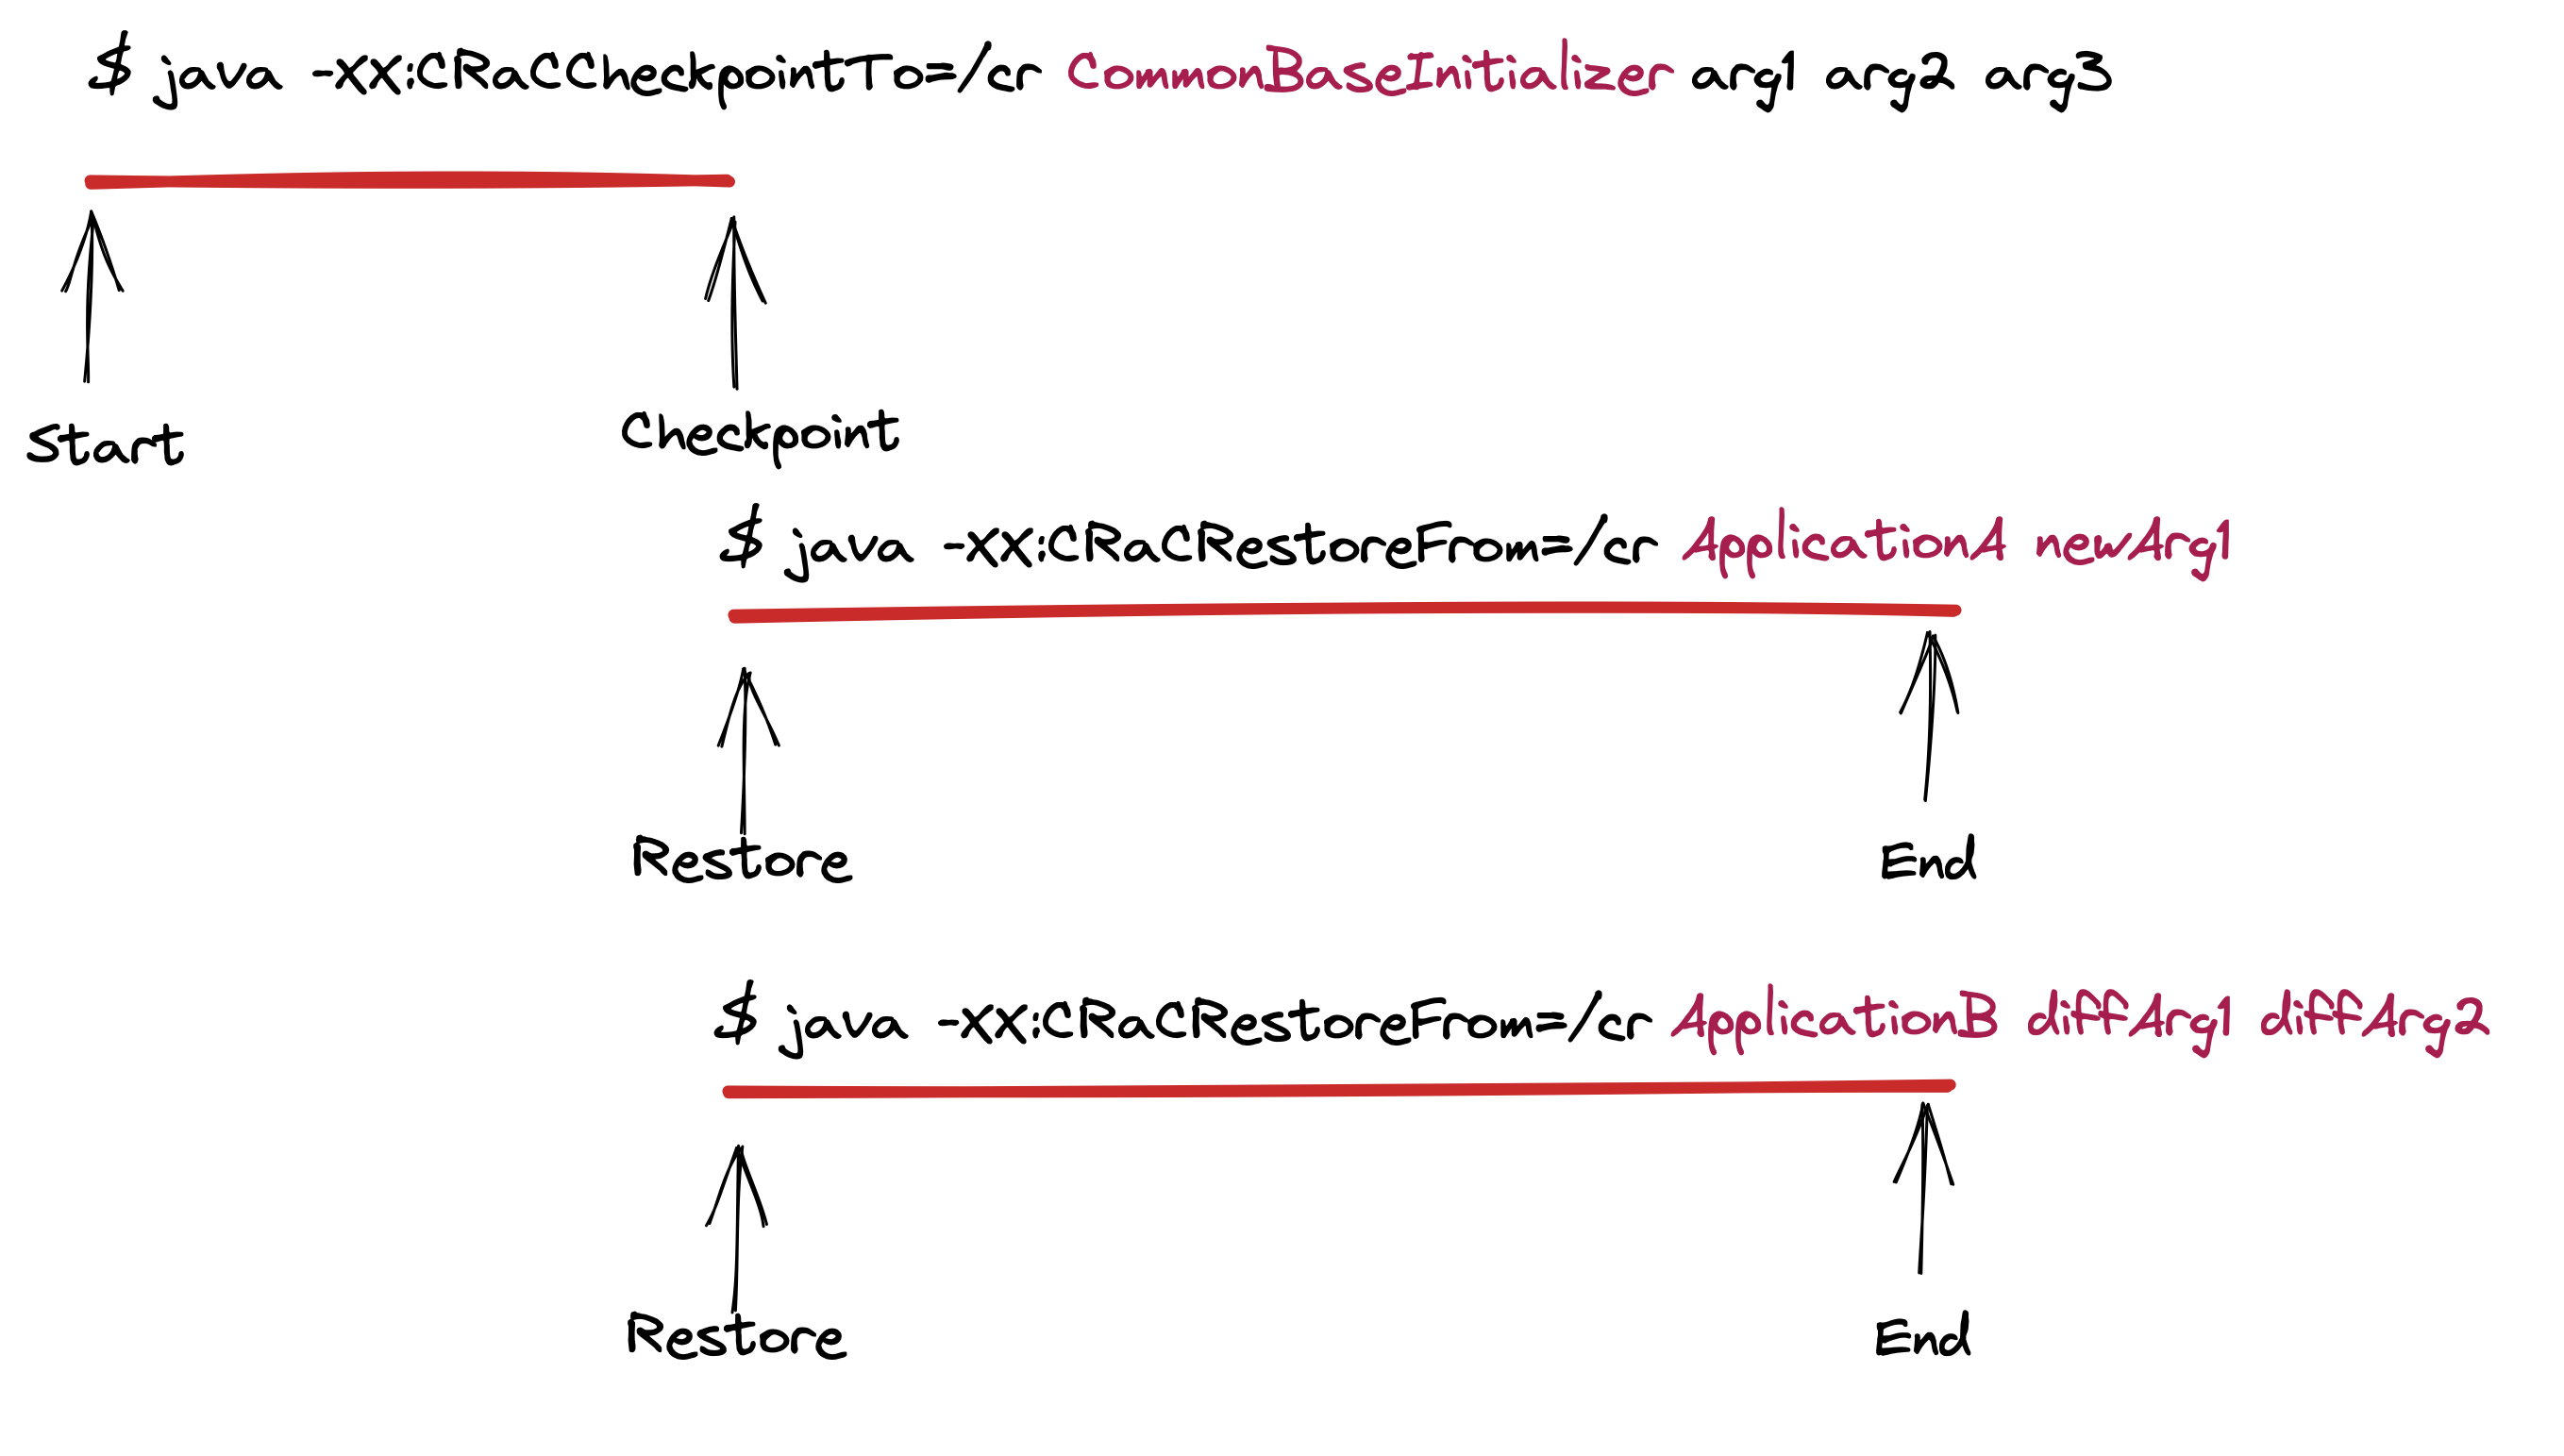 Checkpoint/Restore with Common Base Initializer phase